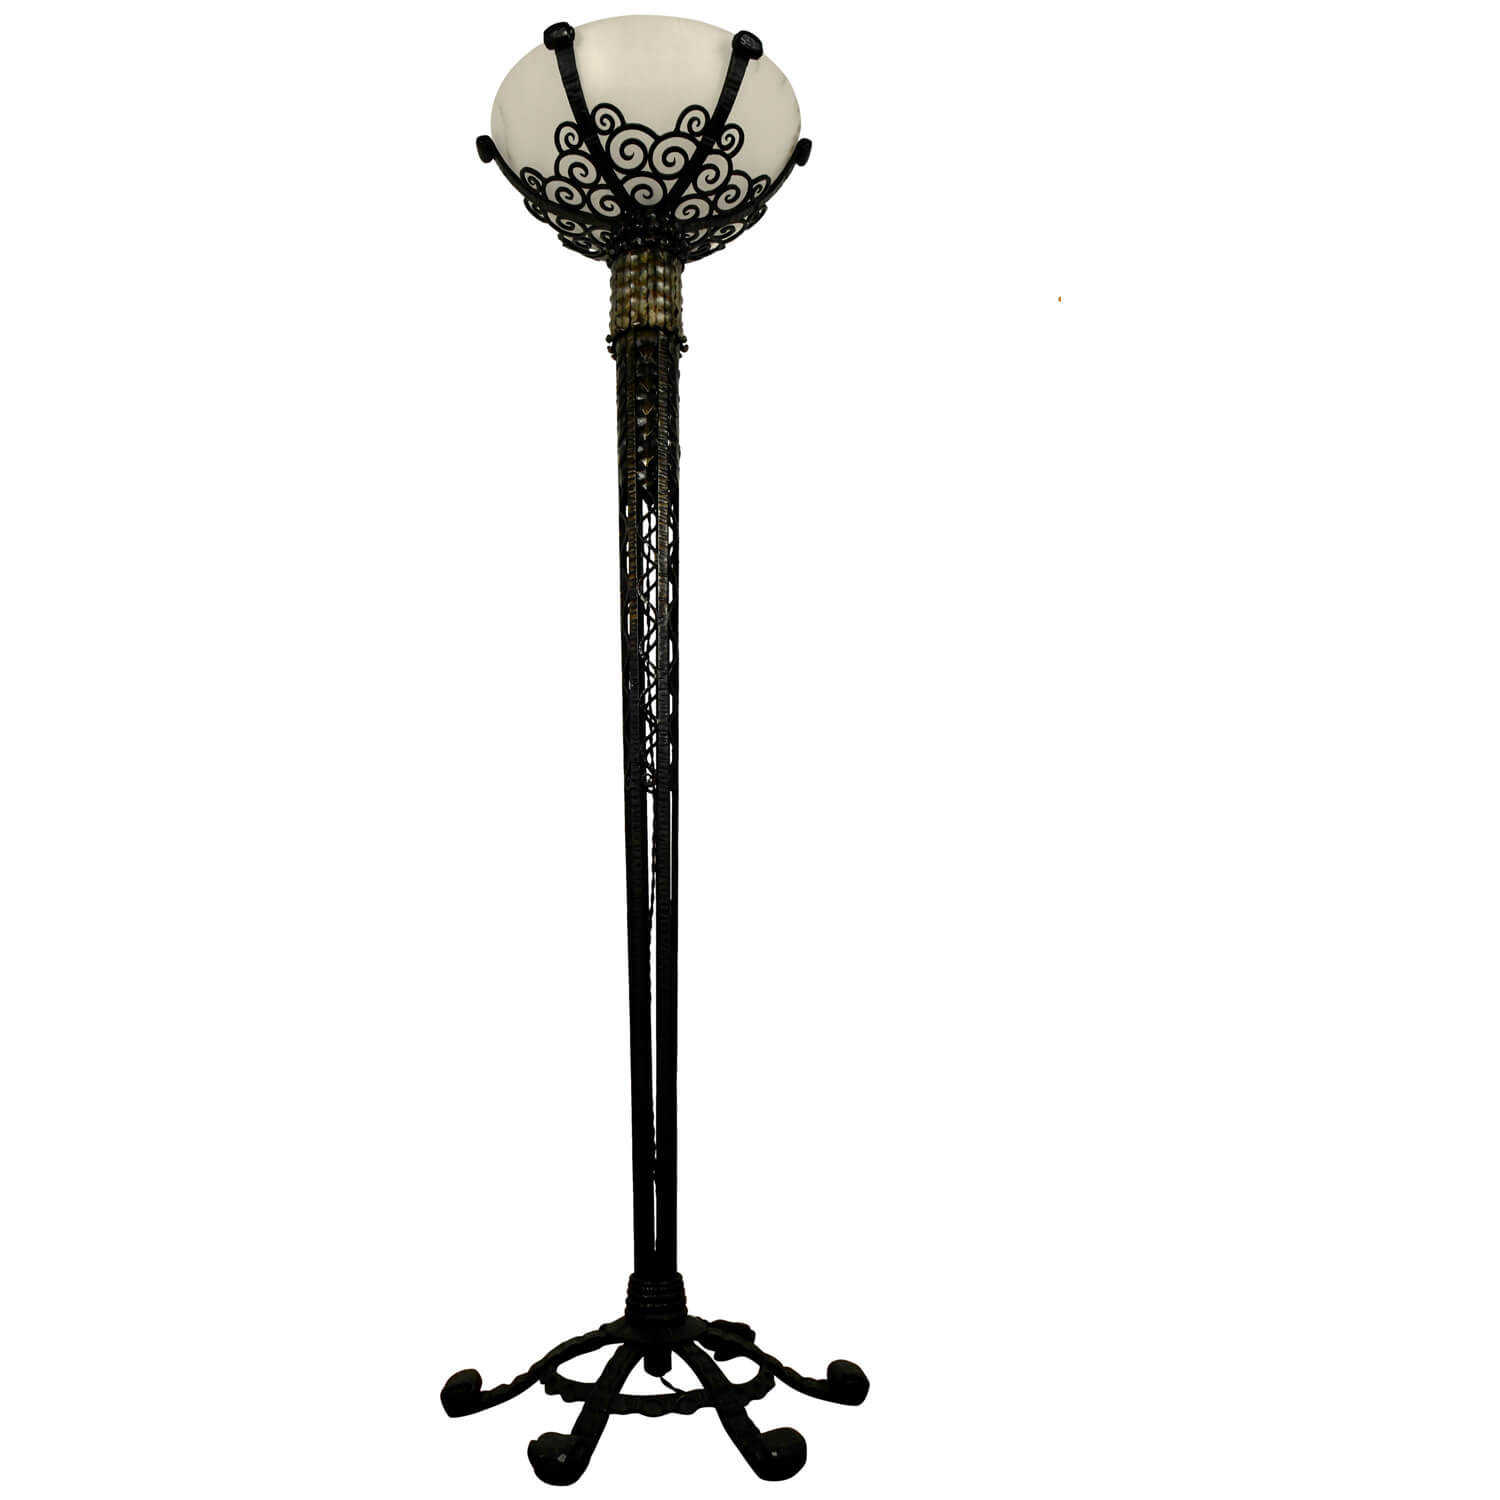 French Art Deco wrought iron and alabaster floorlamp.